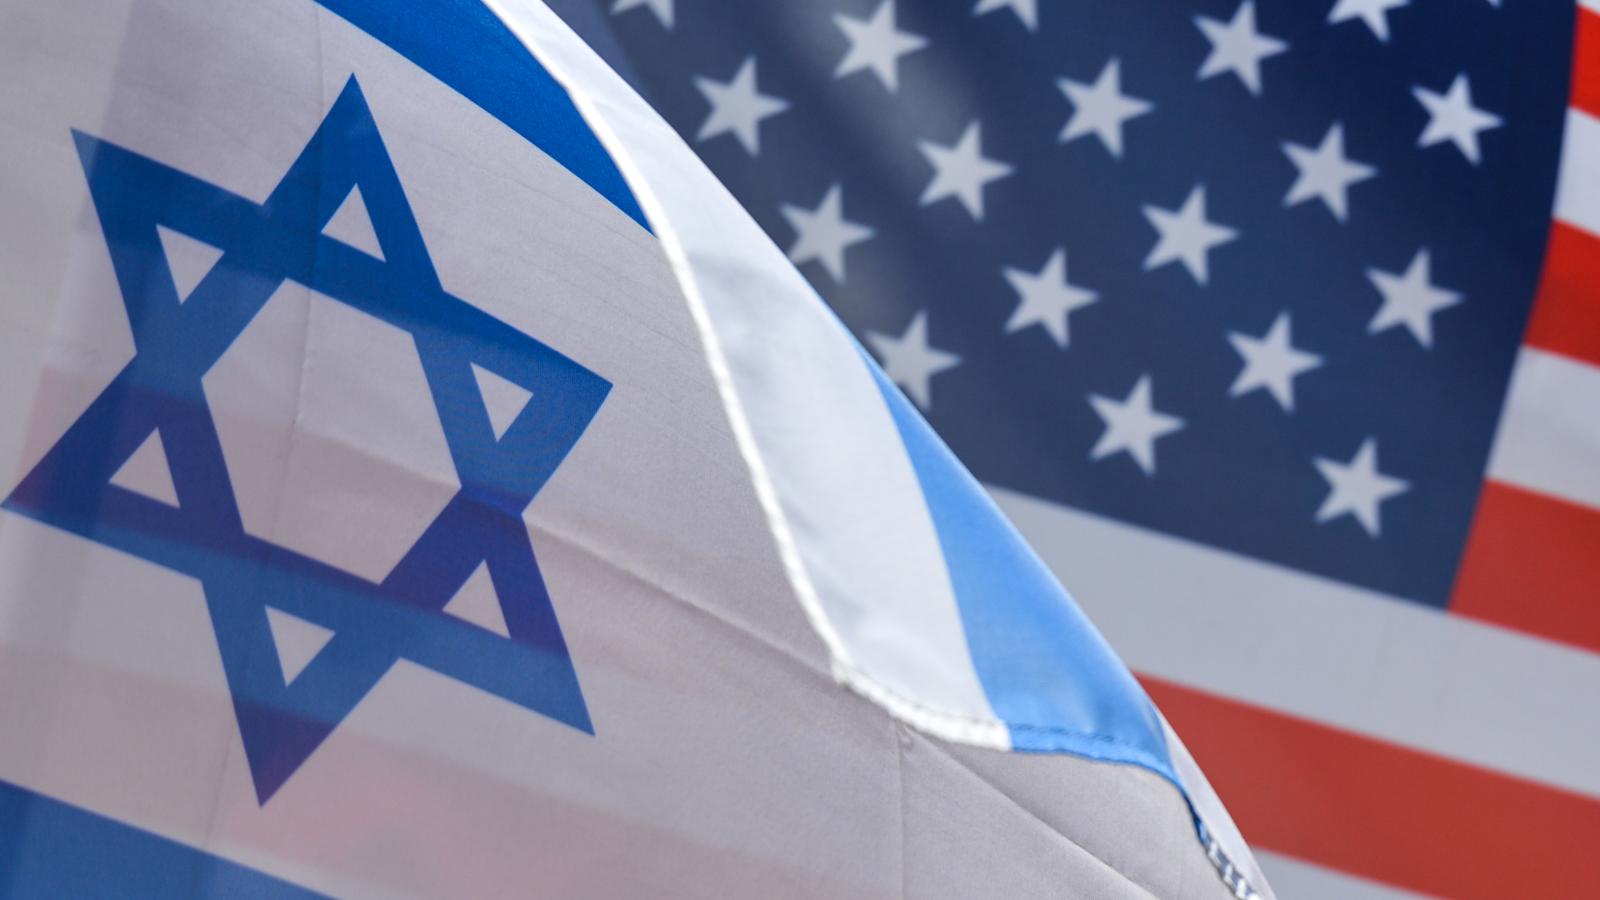 An Israeli and U.S. flags seen in Krakow's Center.